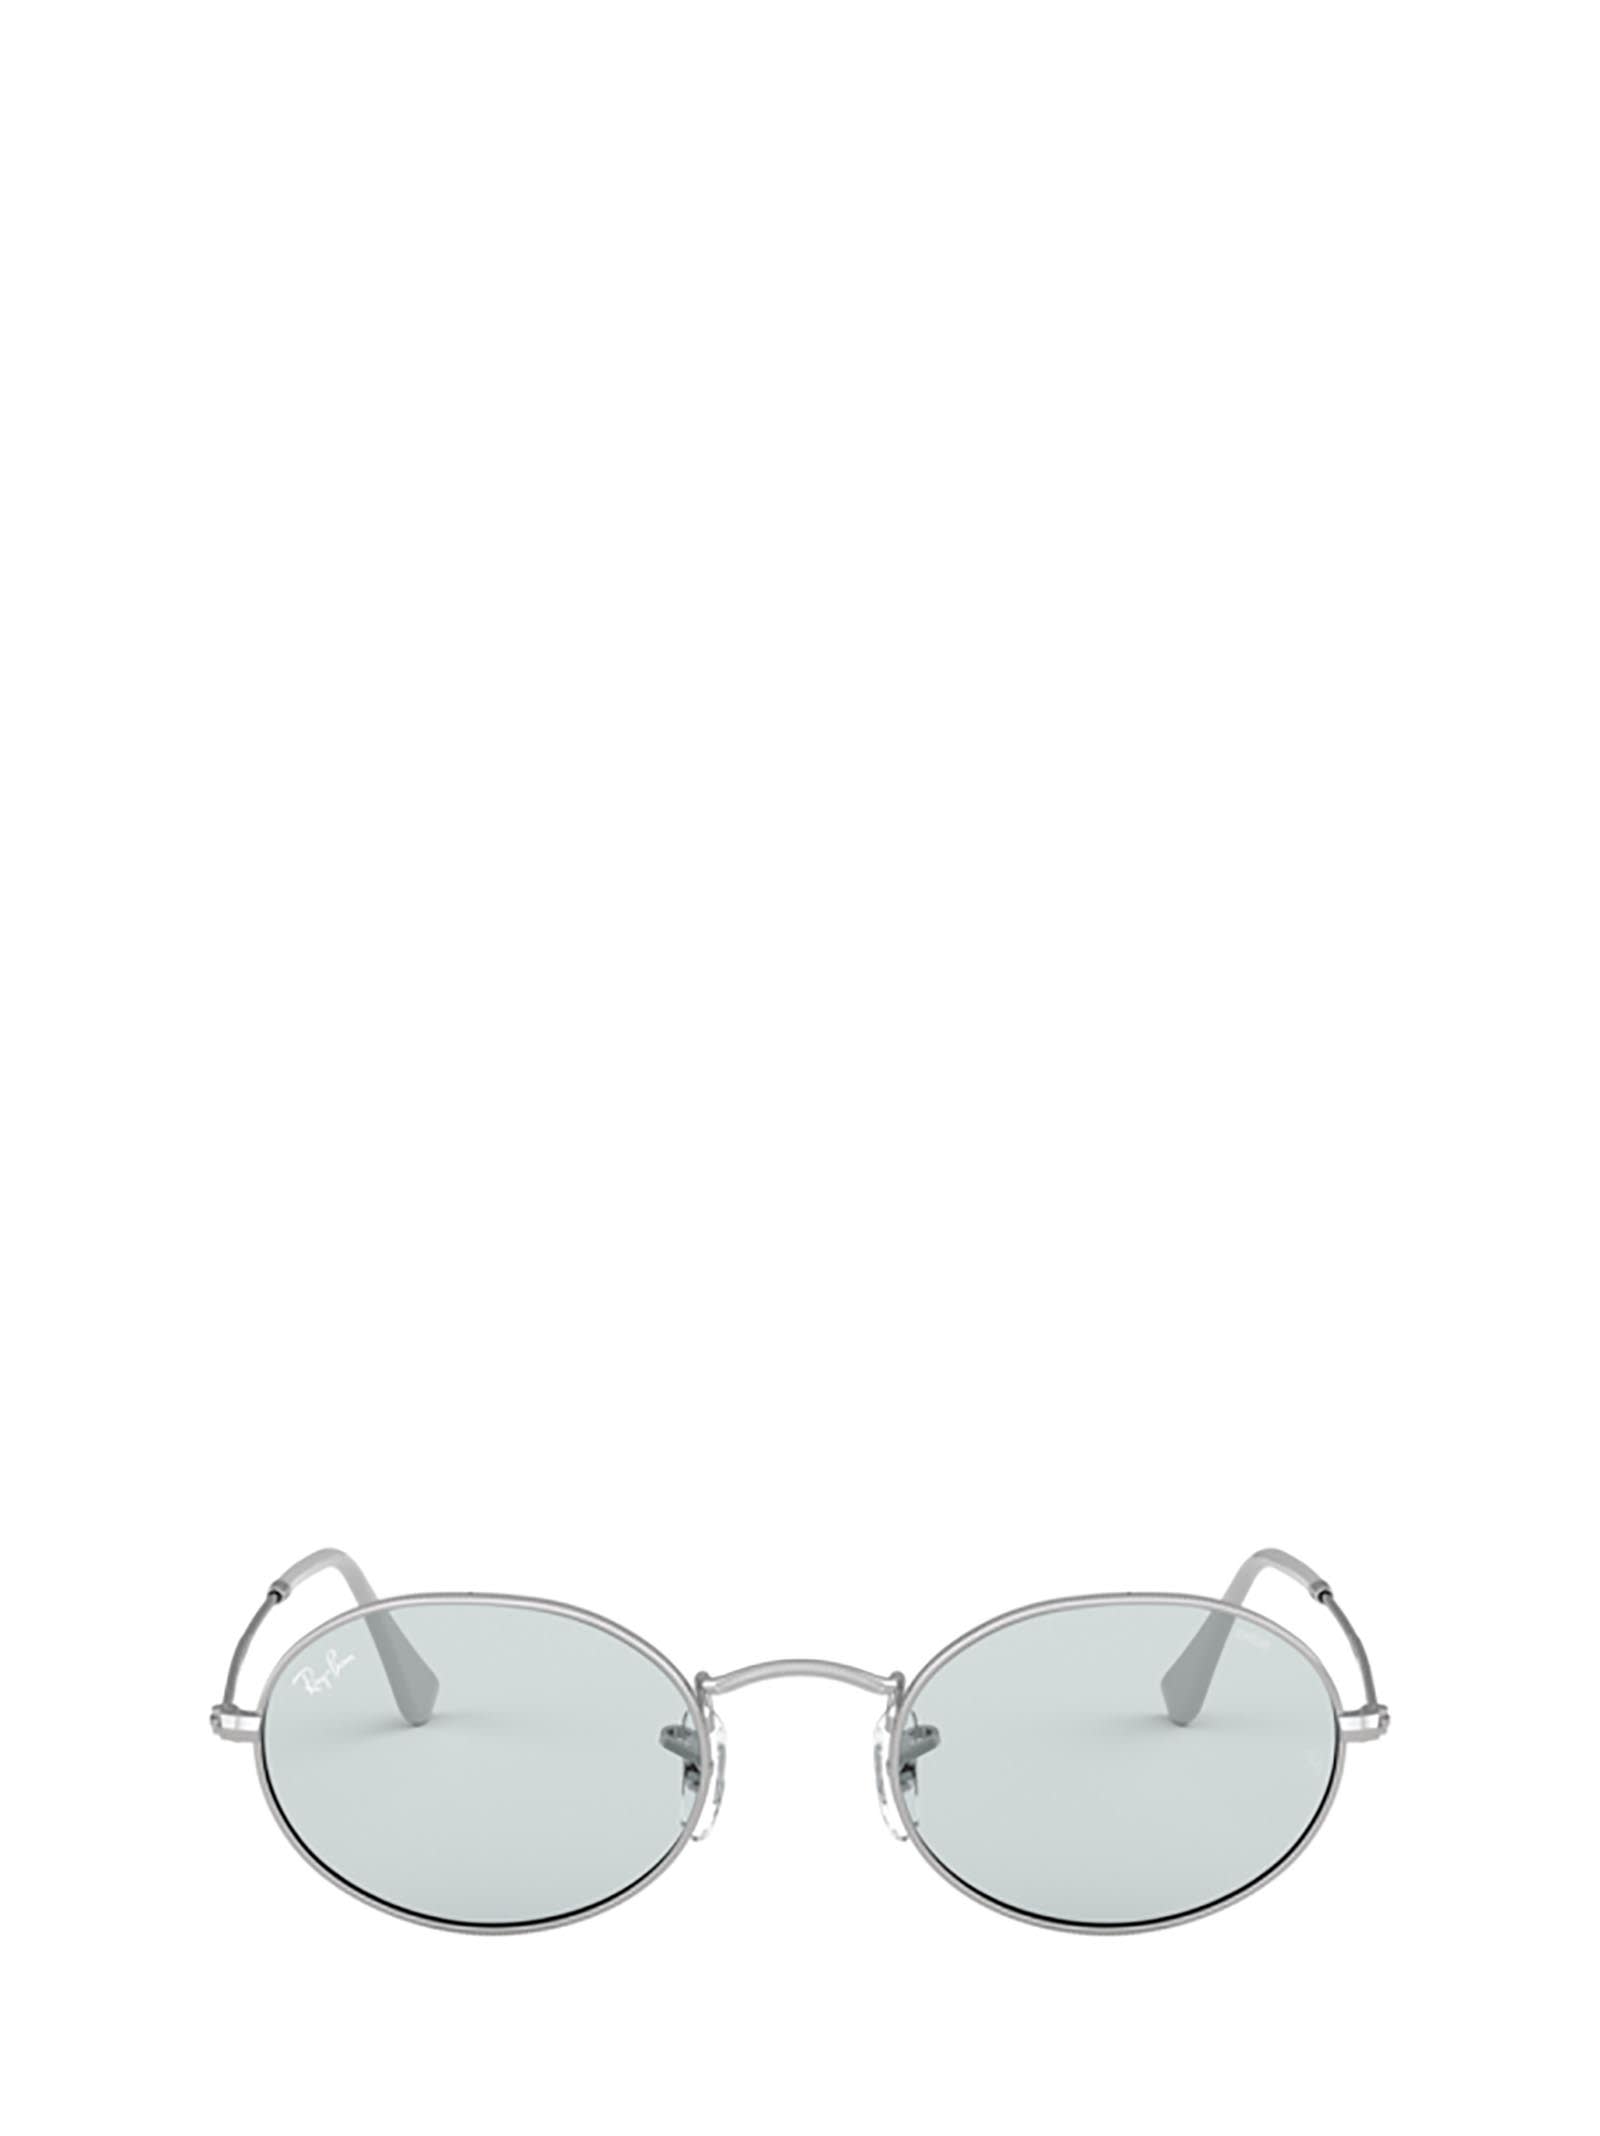 Ray Ban Rb3547 Silver Sunglasses